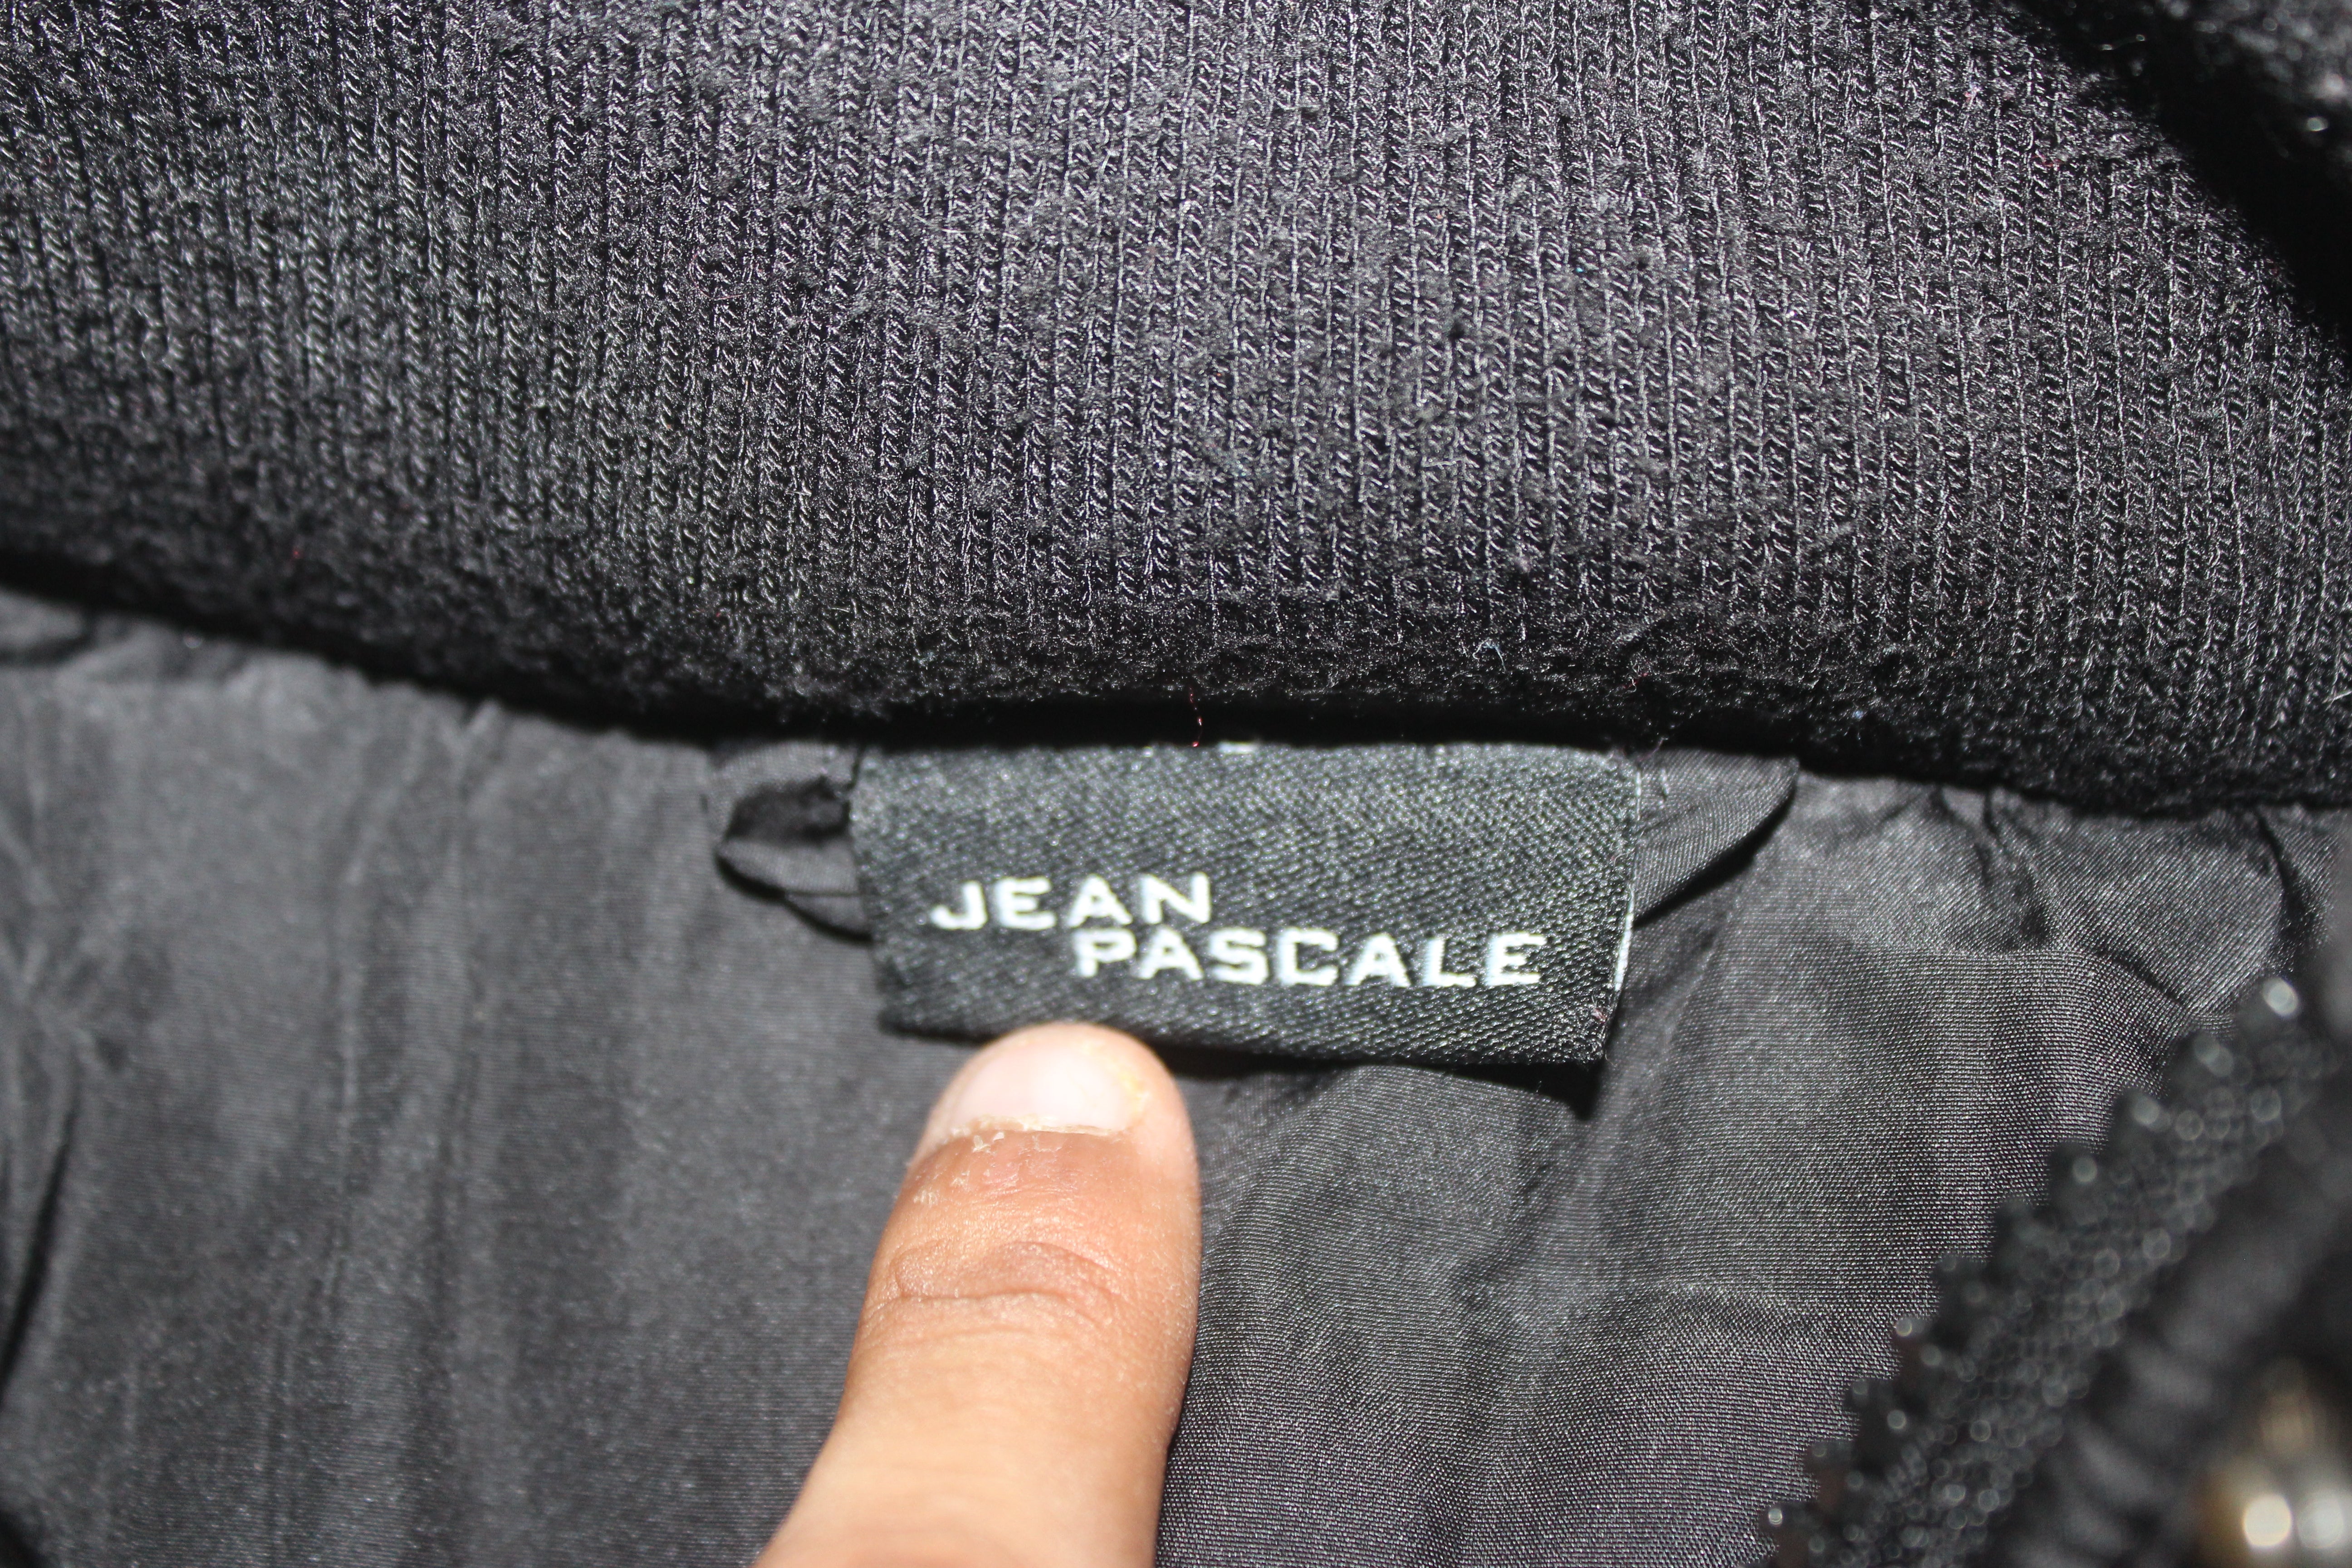 Jean Pascale Branded Original Parachute Puffer For Women Jacket